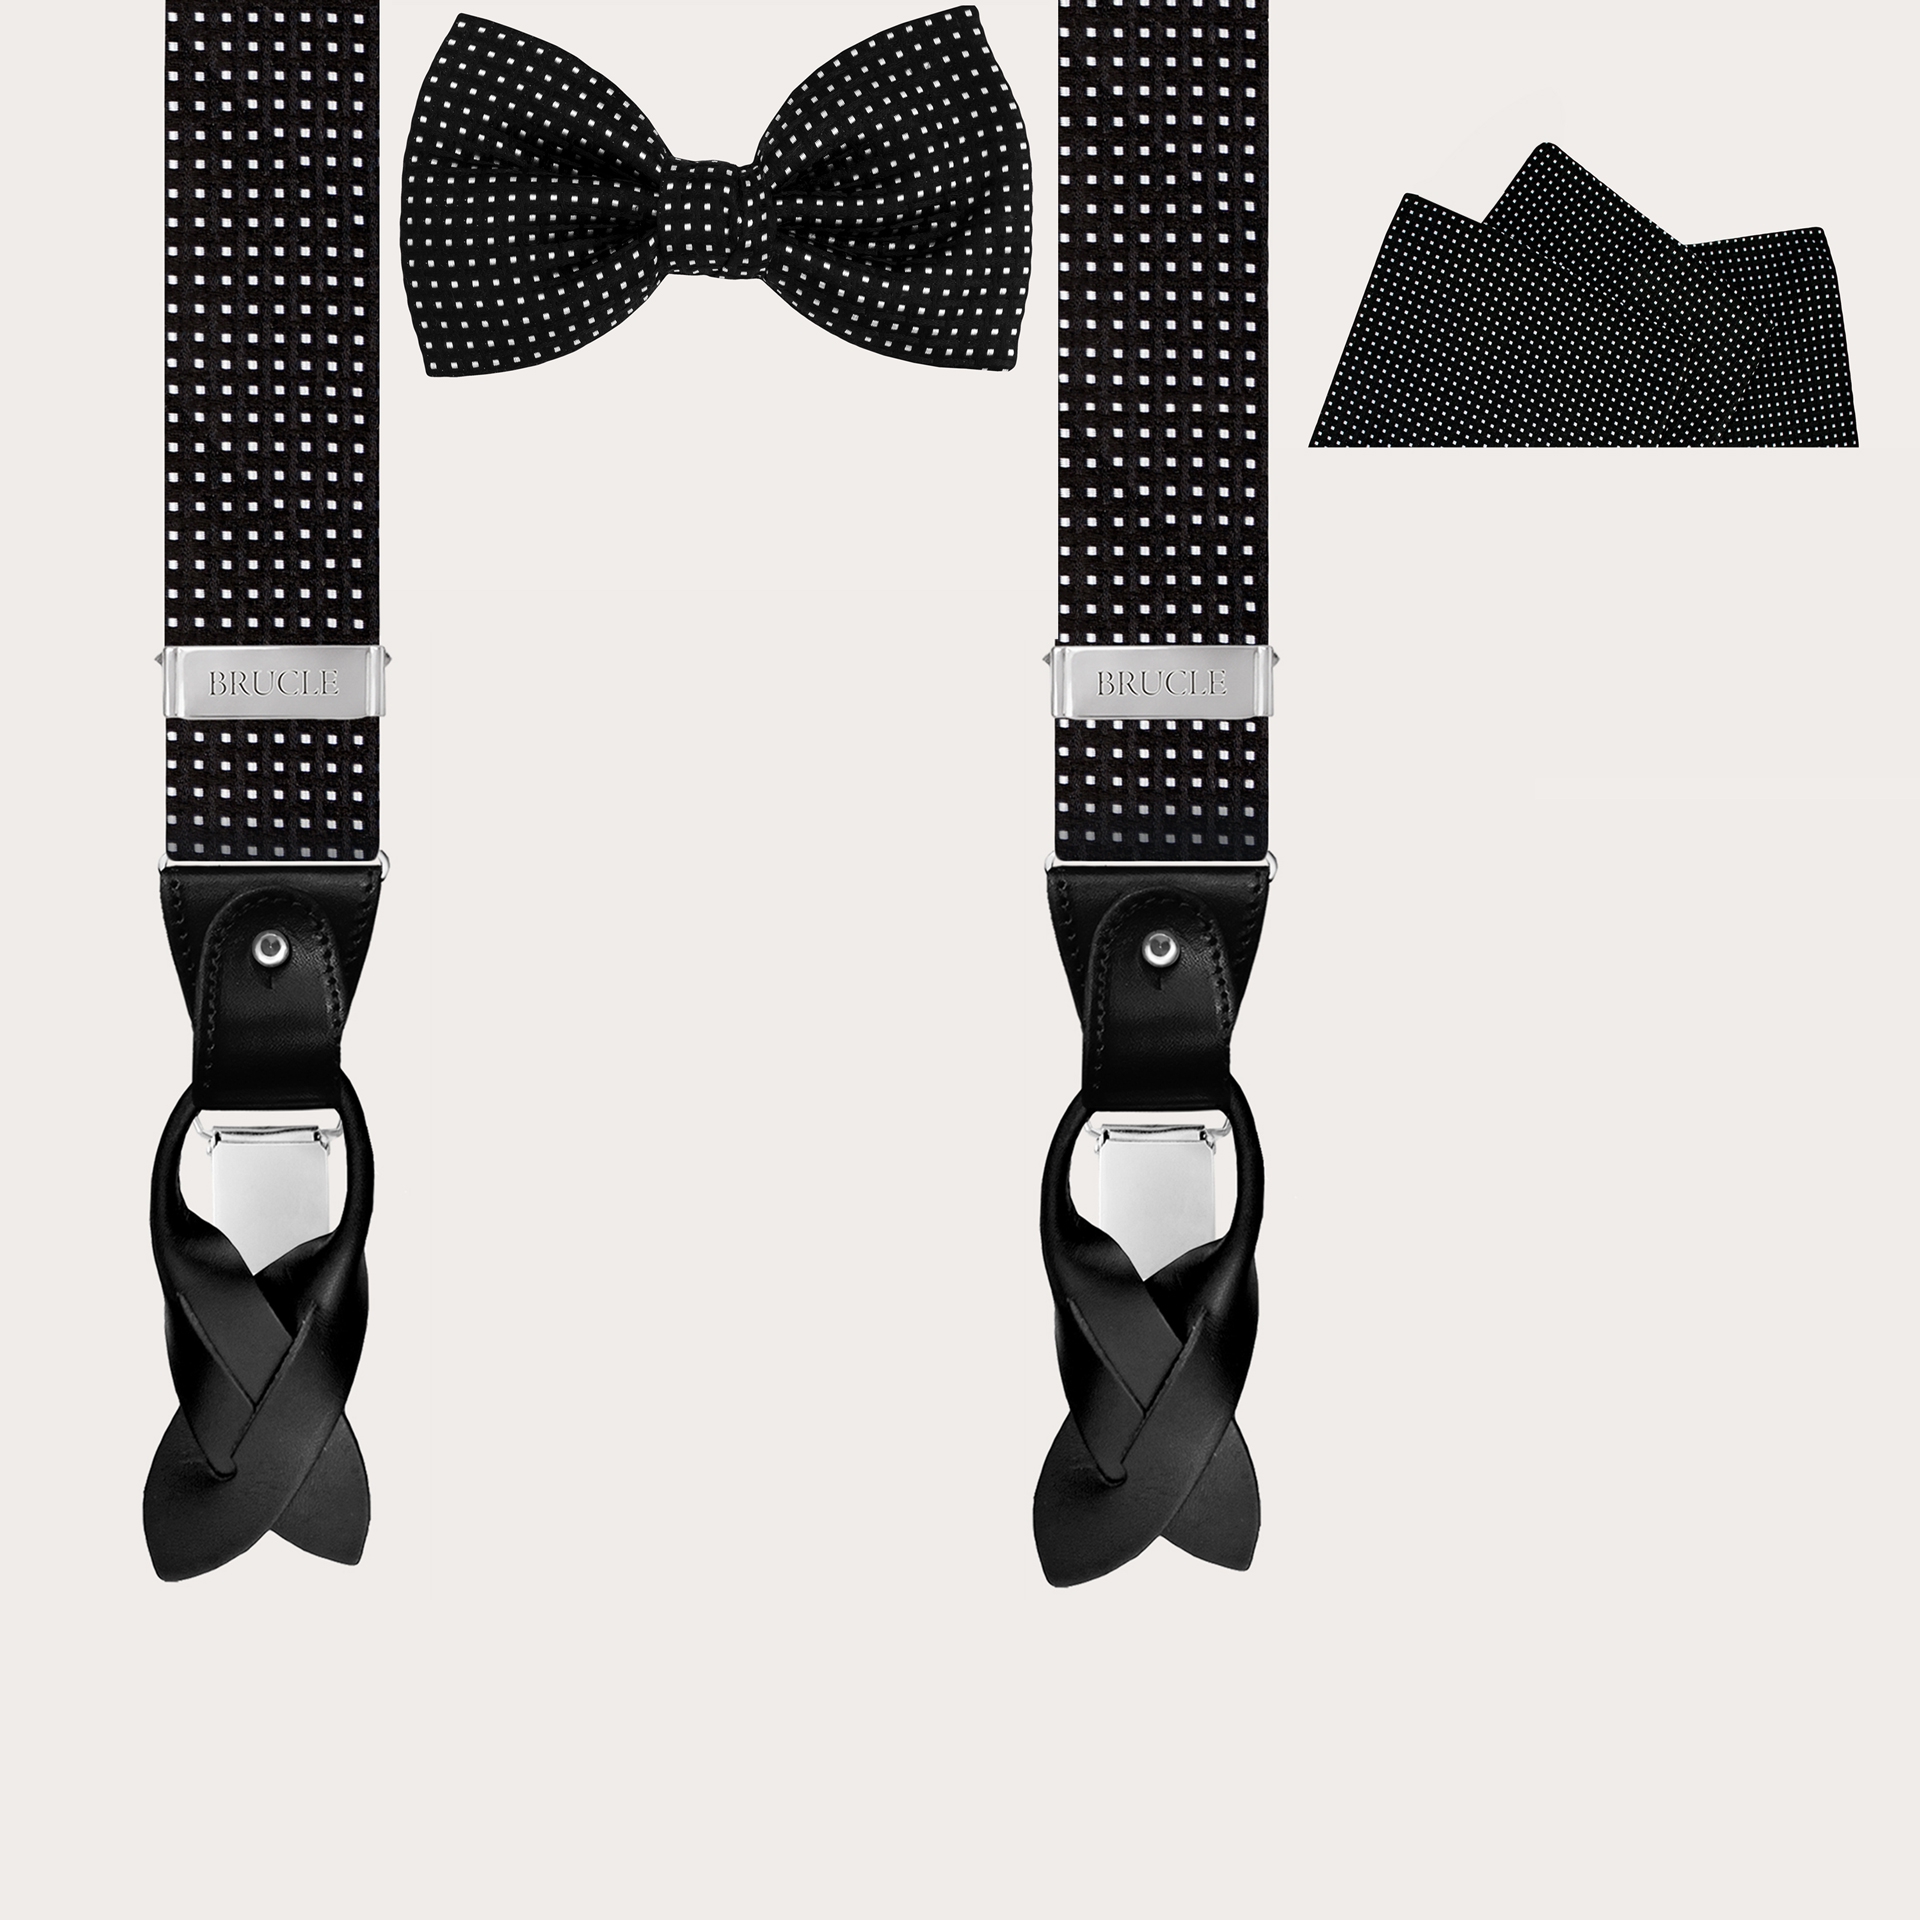 BRUCLE Complete evening set in elegant black jacquard silk with geometric pattern, suspenders, bow tie and pocket square